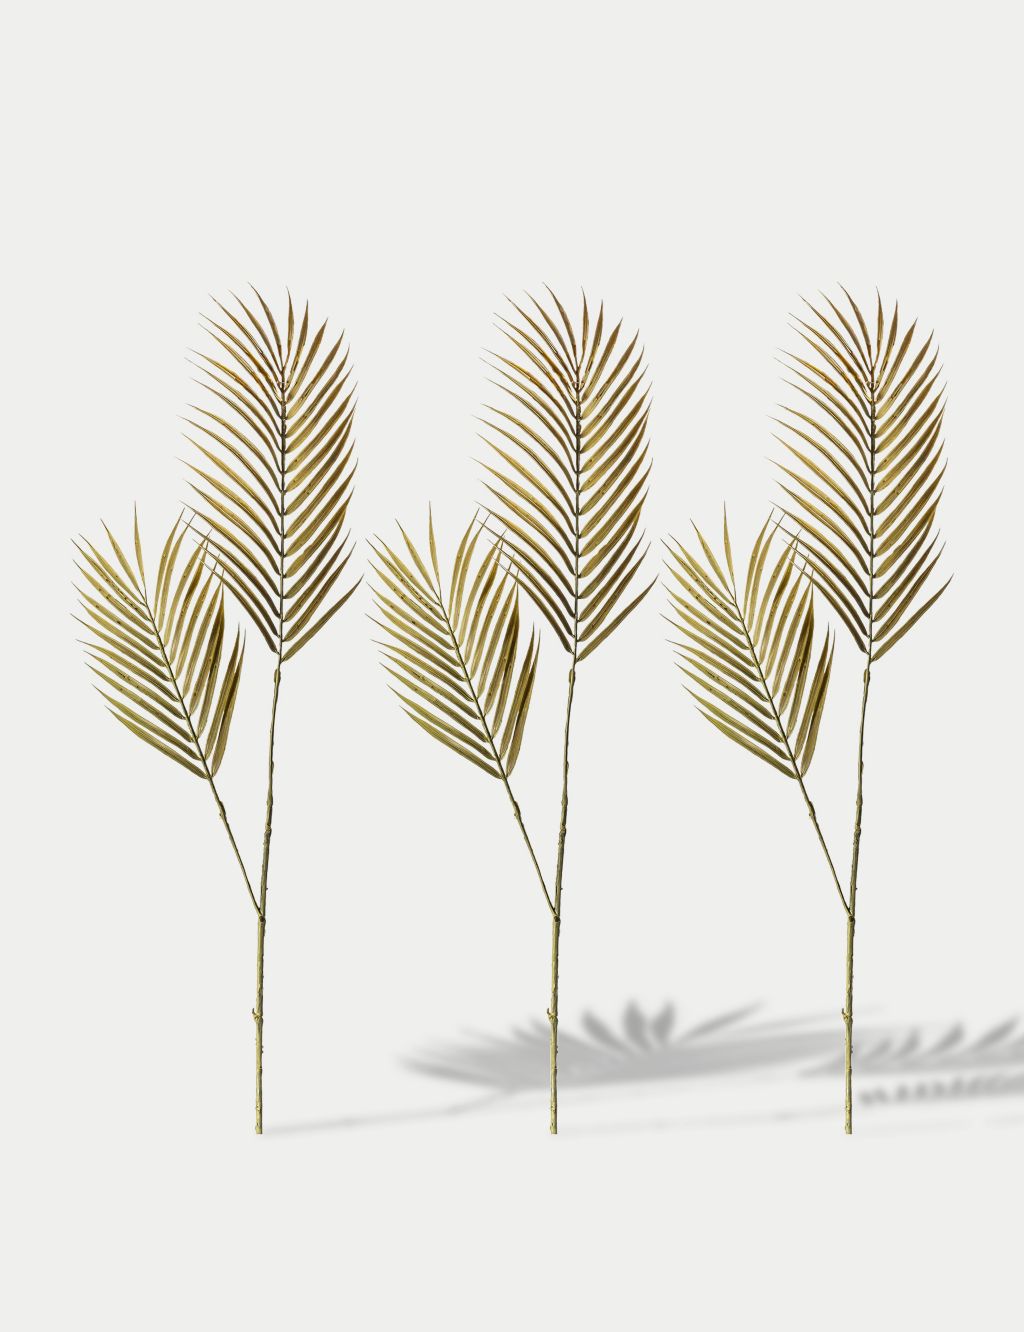 Set of 3 Artificial Dried Palm Single Stems